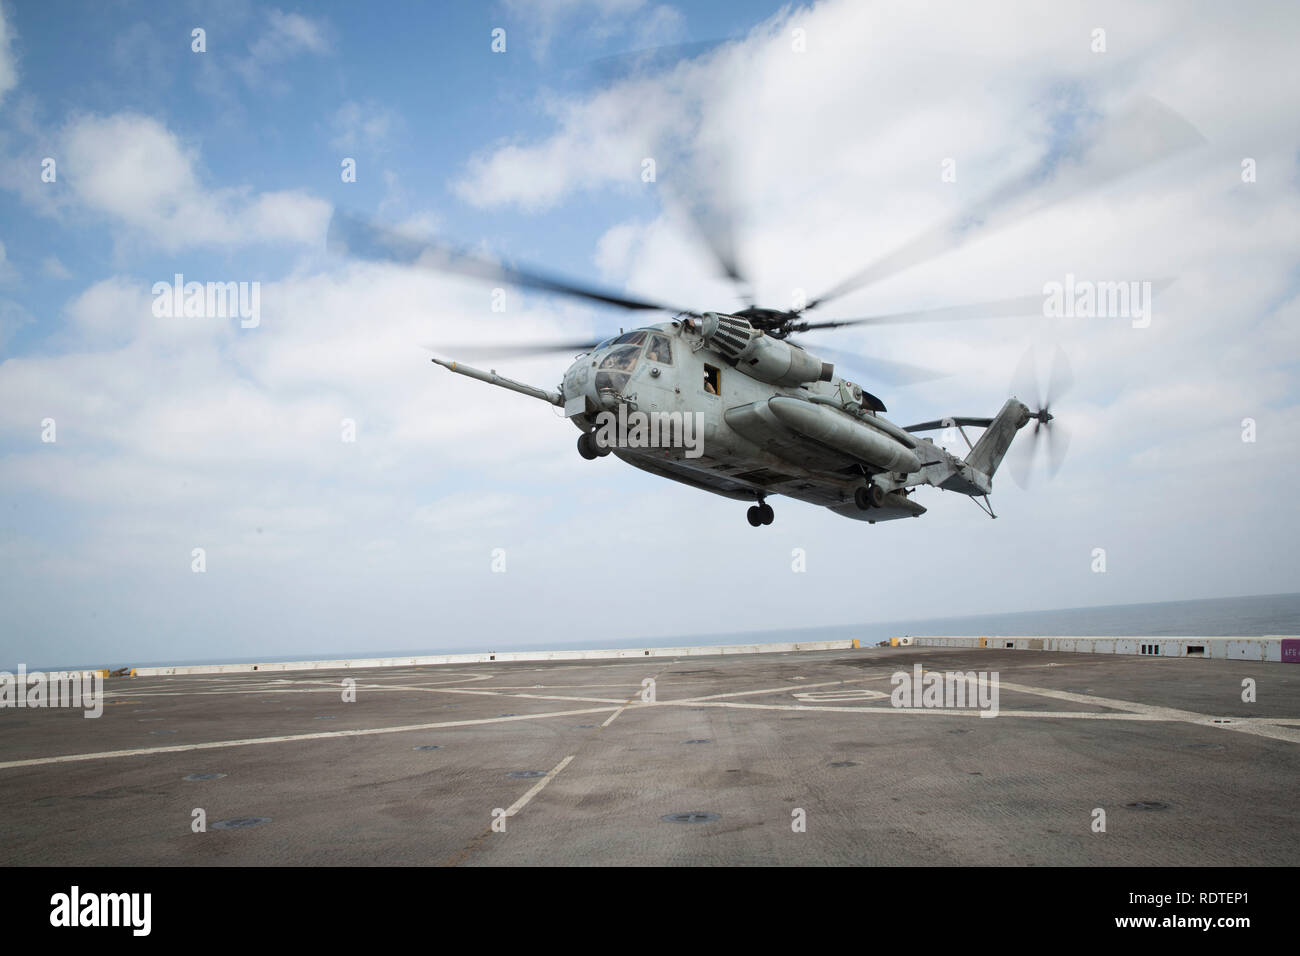 A U.S. Marine Corps CH-53E Super Stallion with Marine Medium Tiltrotor Squadron 166 Reinforced, 13th Marine Expeditionary Unit (MEU), prepares to land aboard the San Antonio-class amphibious transport dock USS Anchorage (LPD 23), Jan. 16, 2019. The Essex Amphibious Ready Group and the 13th MEU are deployed to the U.S. 5th fleet area of operations in support of naval operations to ensure maritime stability and security in the Central Region, connecting the Mediterranean and the Pacific through the western Indian Ocean and three strategic choke points. (U.S. Marine Corps photo by Sgt. Victoria D Stock Photo